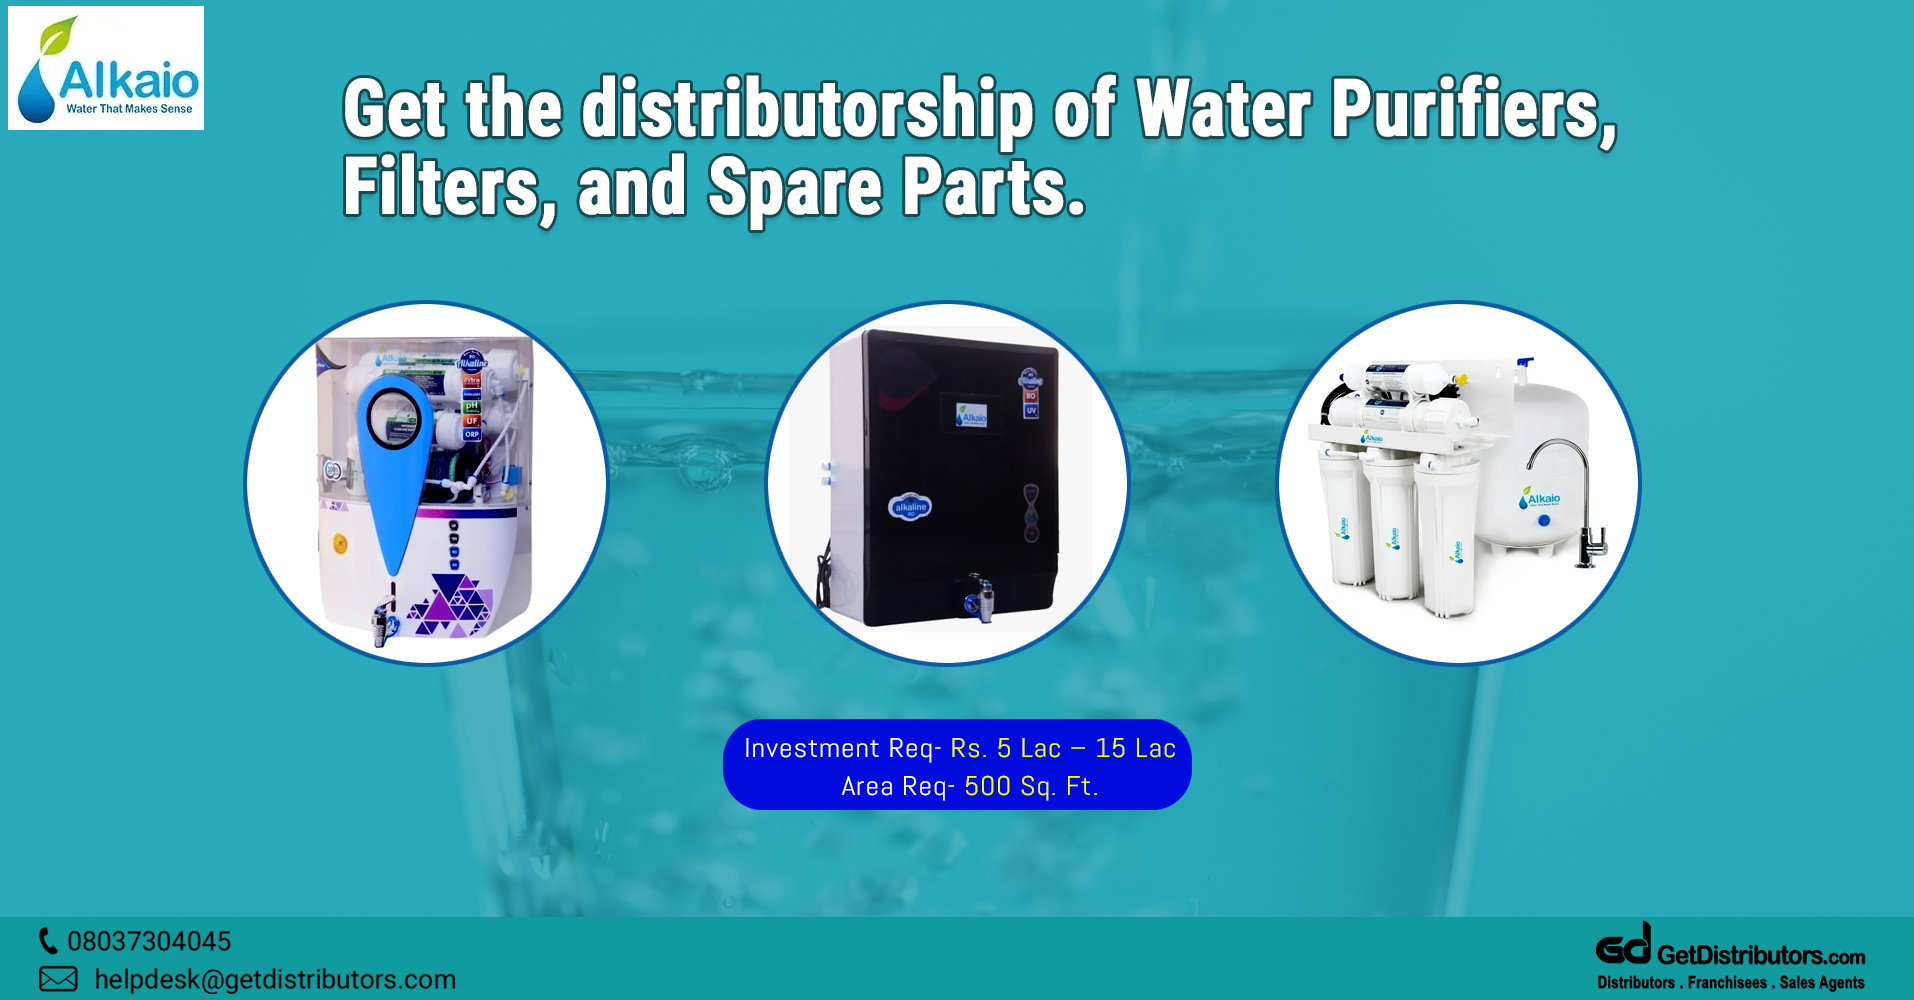 Water purifiers, filters, and spare parts for distribution